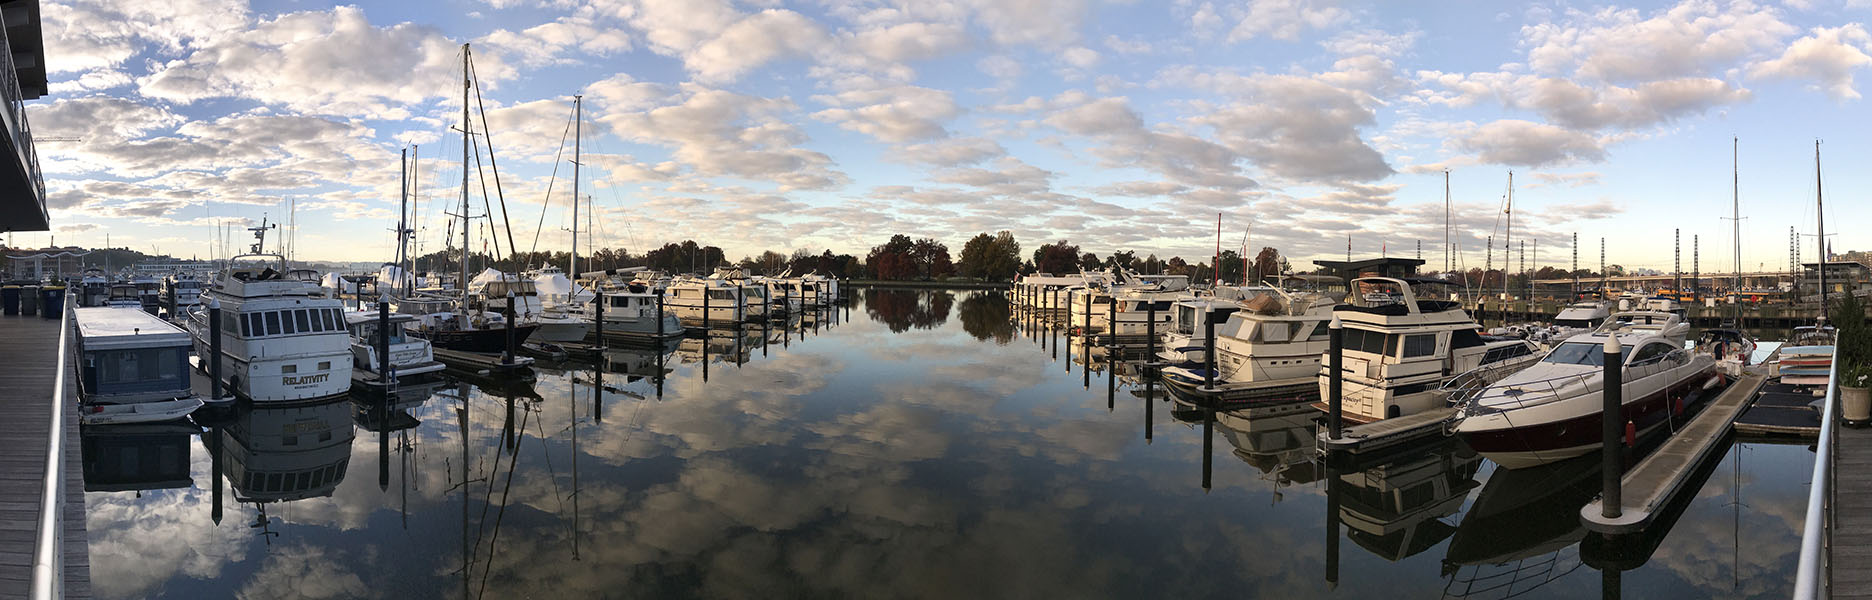 180 Degree views of Marina with Blue Sky and Puffy Clouds Reflected in the Water.